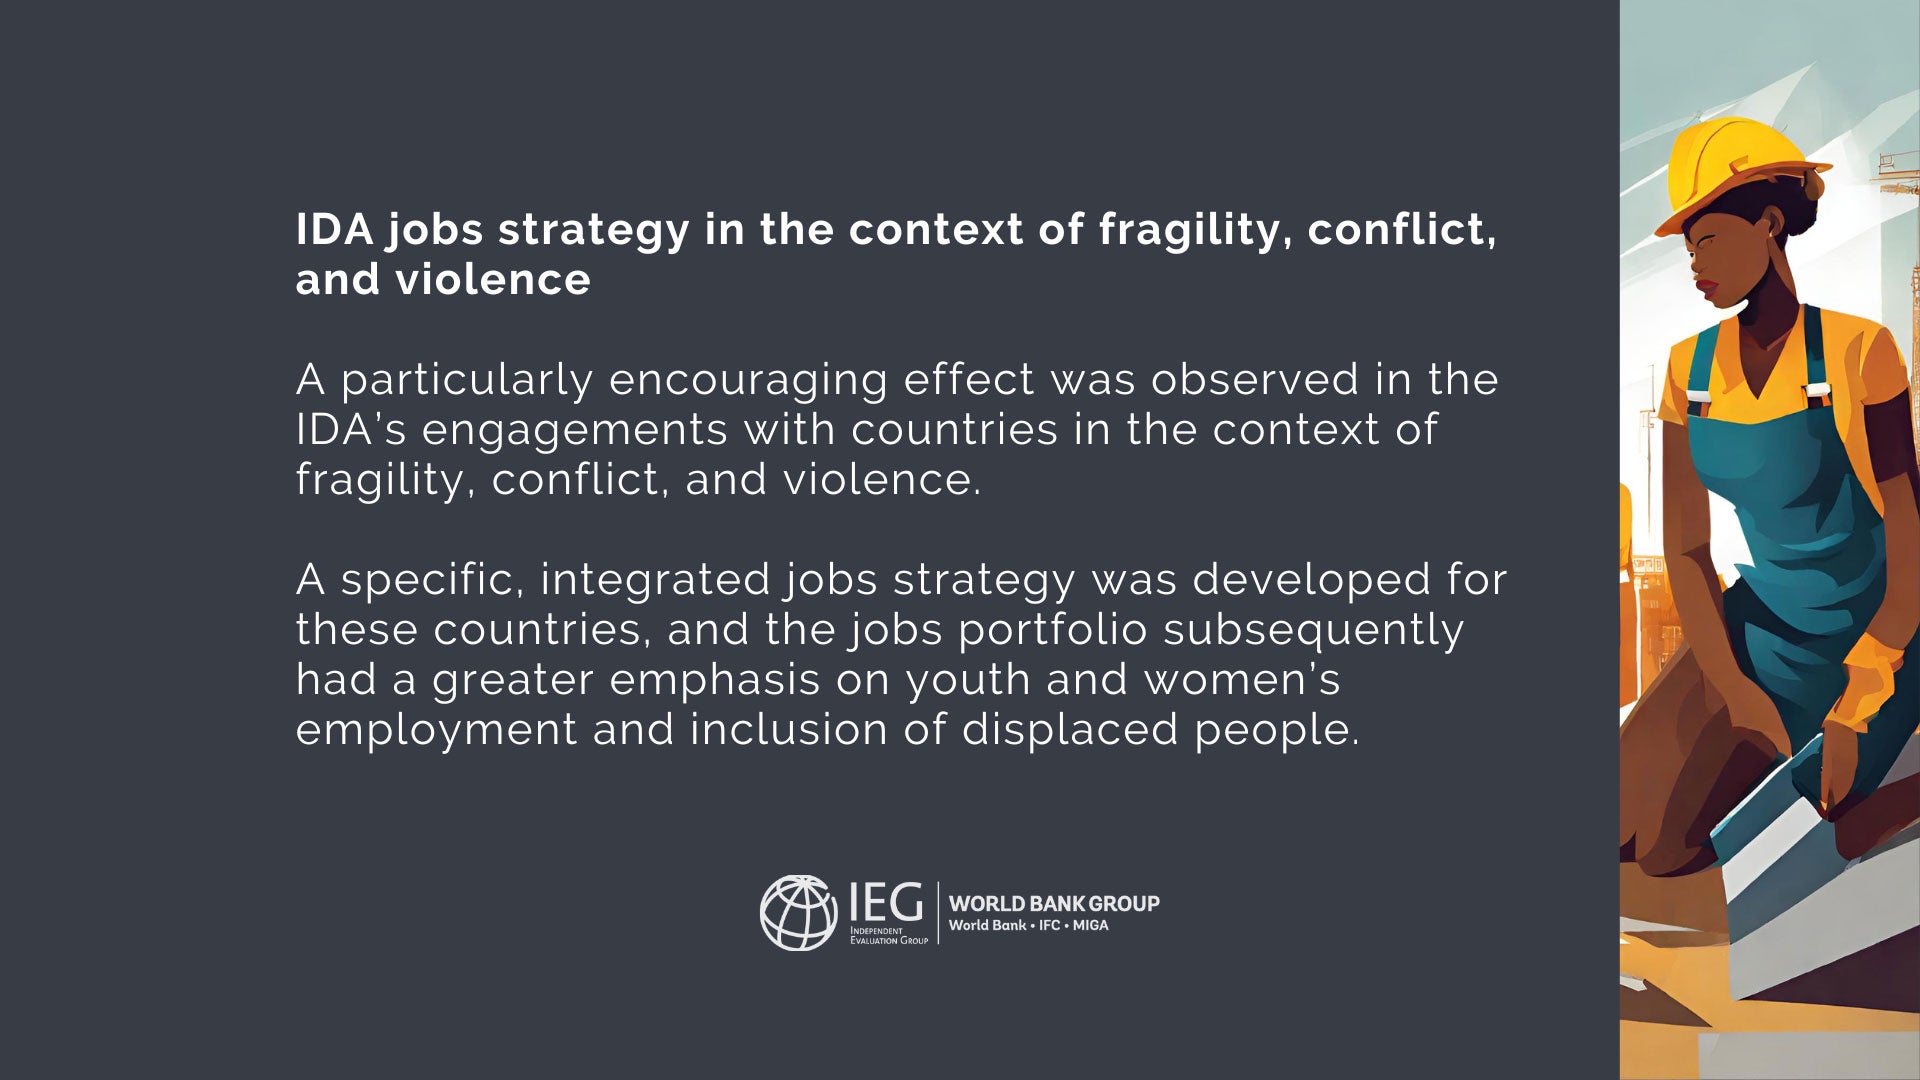 Infographic with white text on a black background. The text discusses the integrated jobs strategy developed by International Development Association for countries affected by fragility, conflict, and violence.